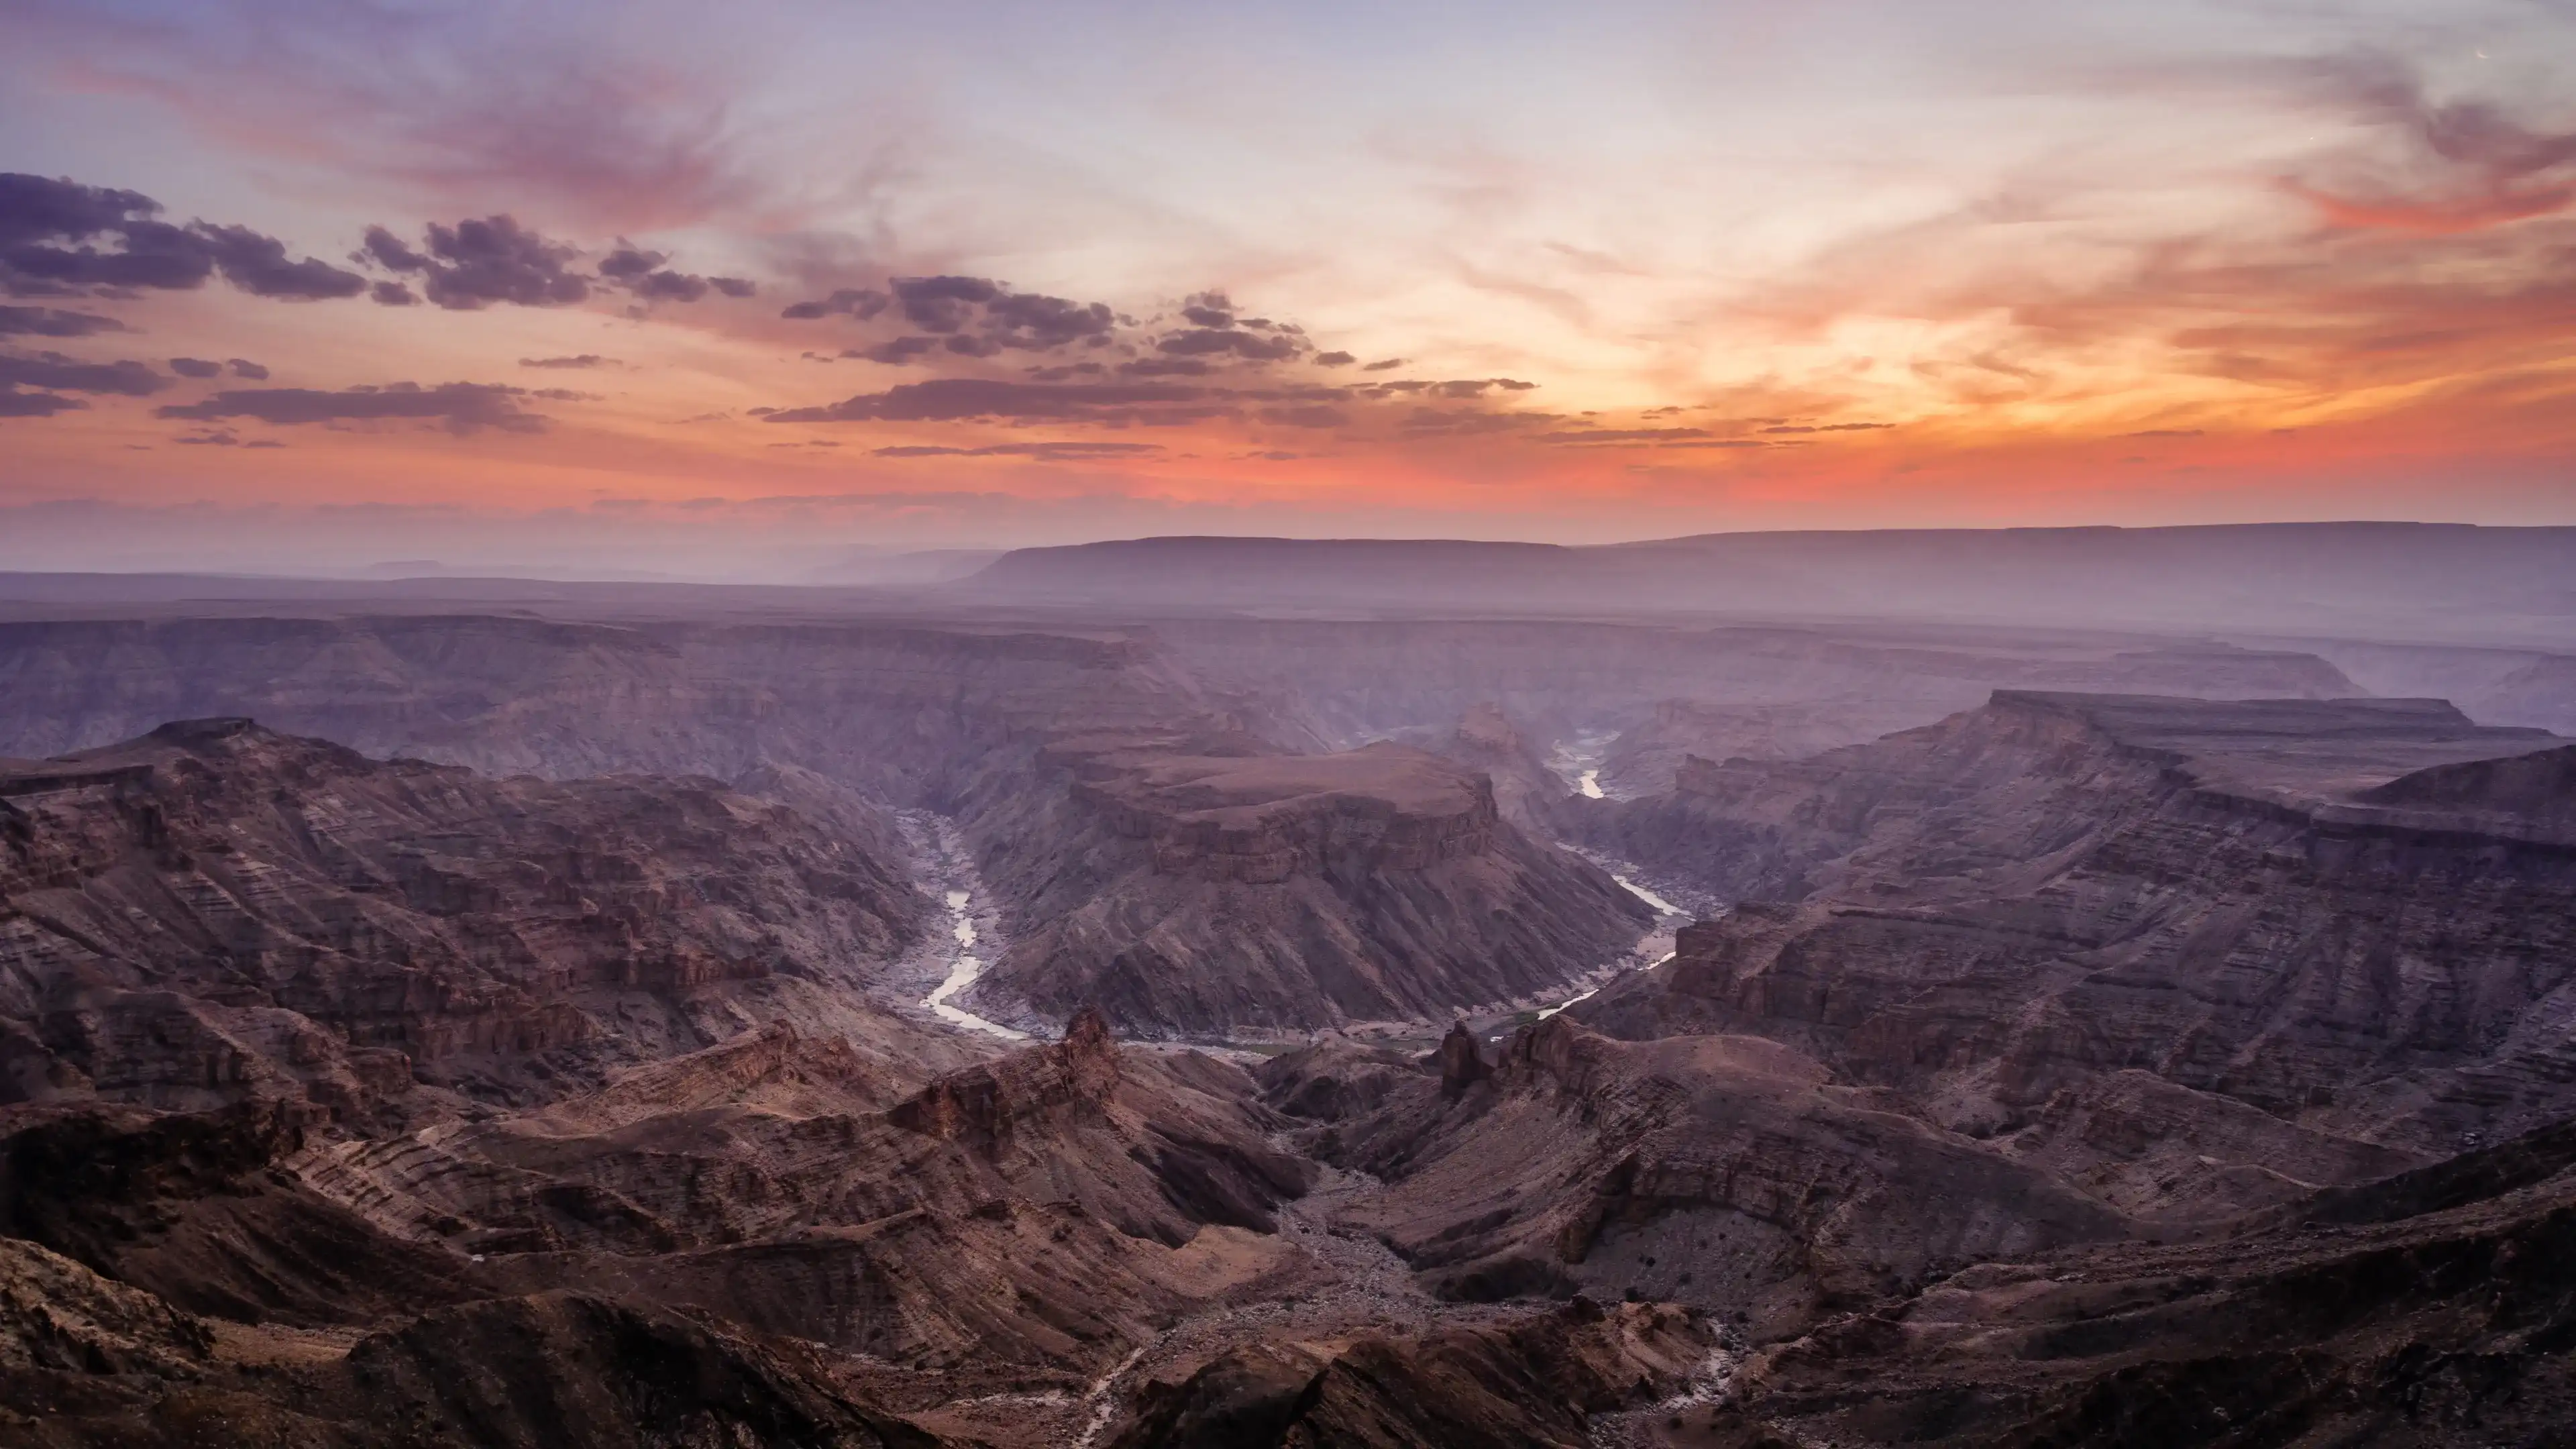 Sunset over the Fish River Canyon in Namibia, the second largest canyon in the world and the largest in Africa.